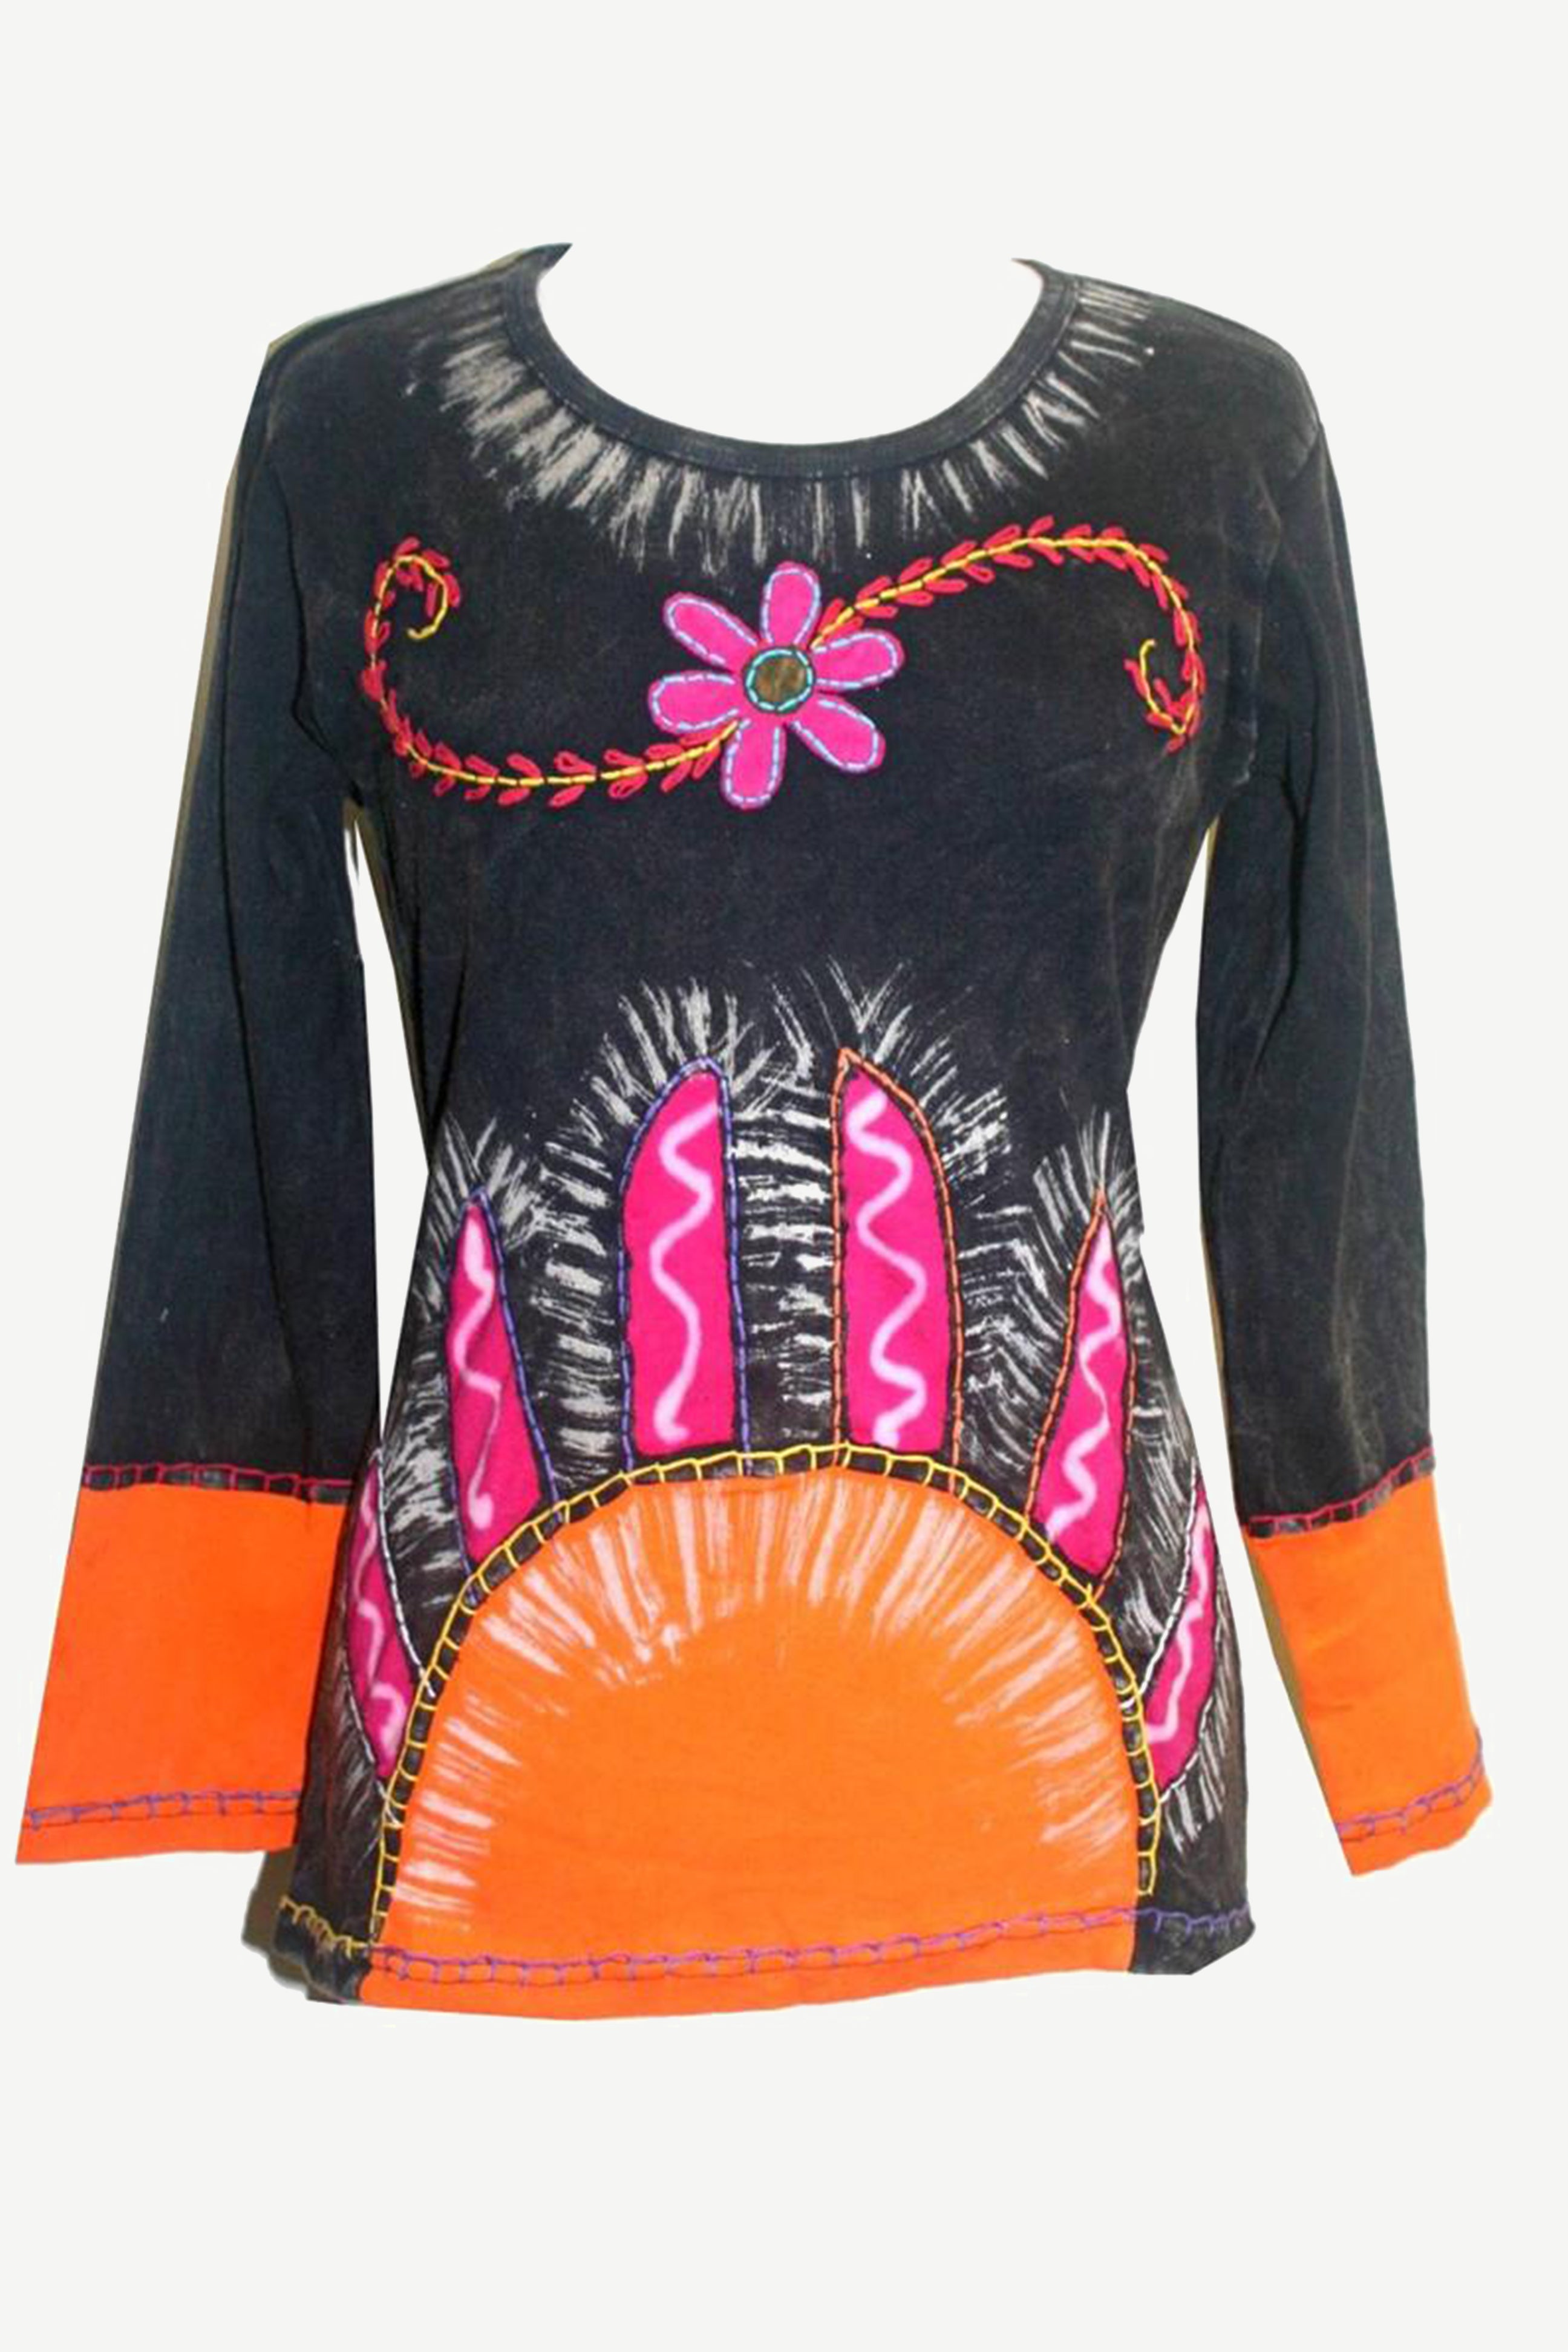 R 256 Tie-dye Funky Embroidered Sun Bohemian Gypsy Top Blouse – Agan ...